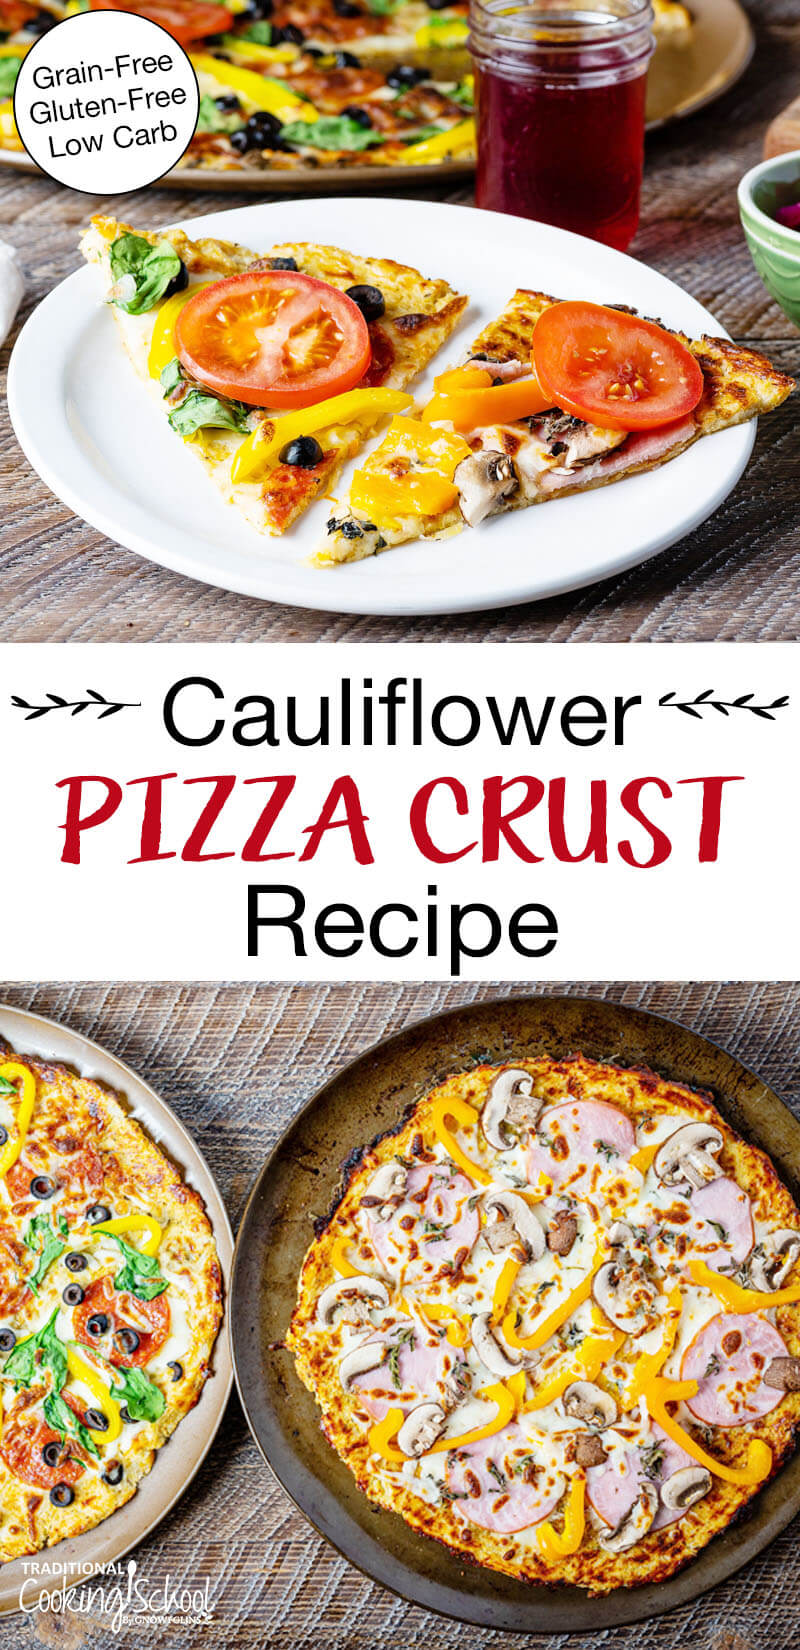 Photo collage of cauliflower pizzas topped with fresh veggies and meats. Text overlay says: "Cauliflower Pizza Crust Recipe (Grain-Free Gluten-Free Low Carb)"